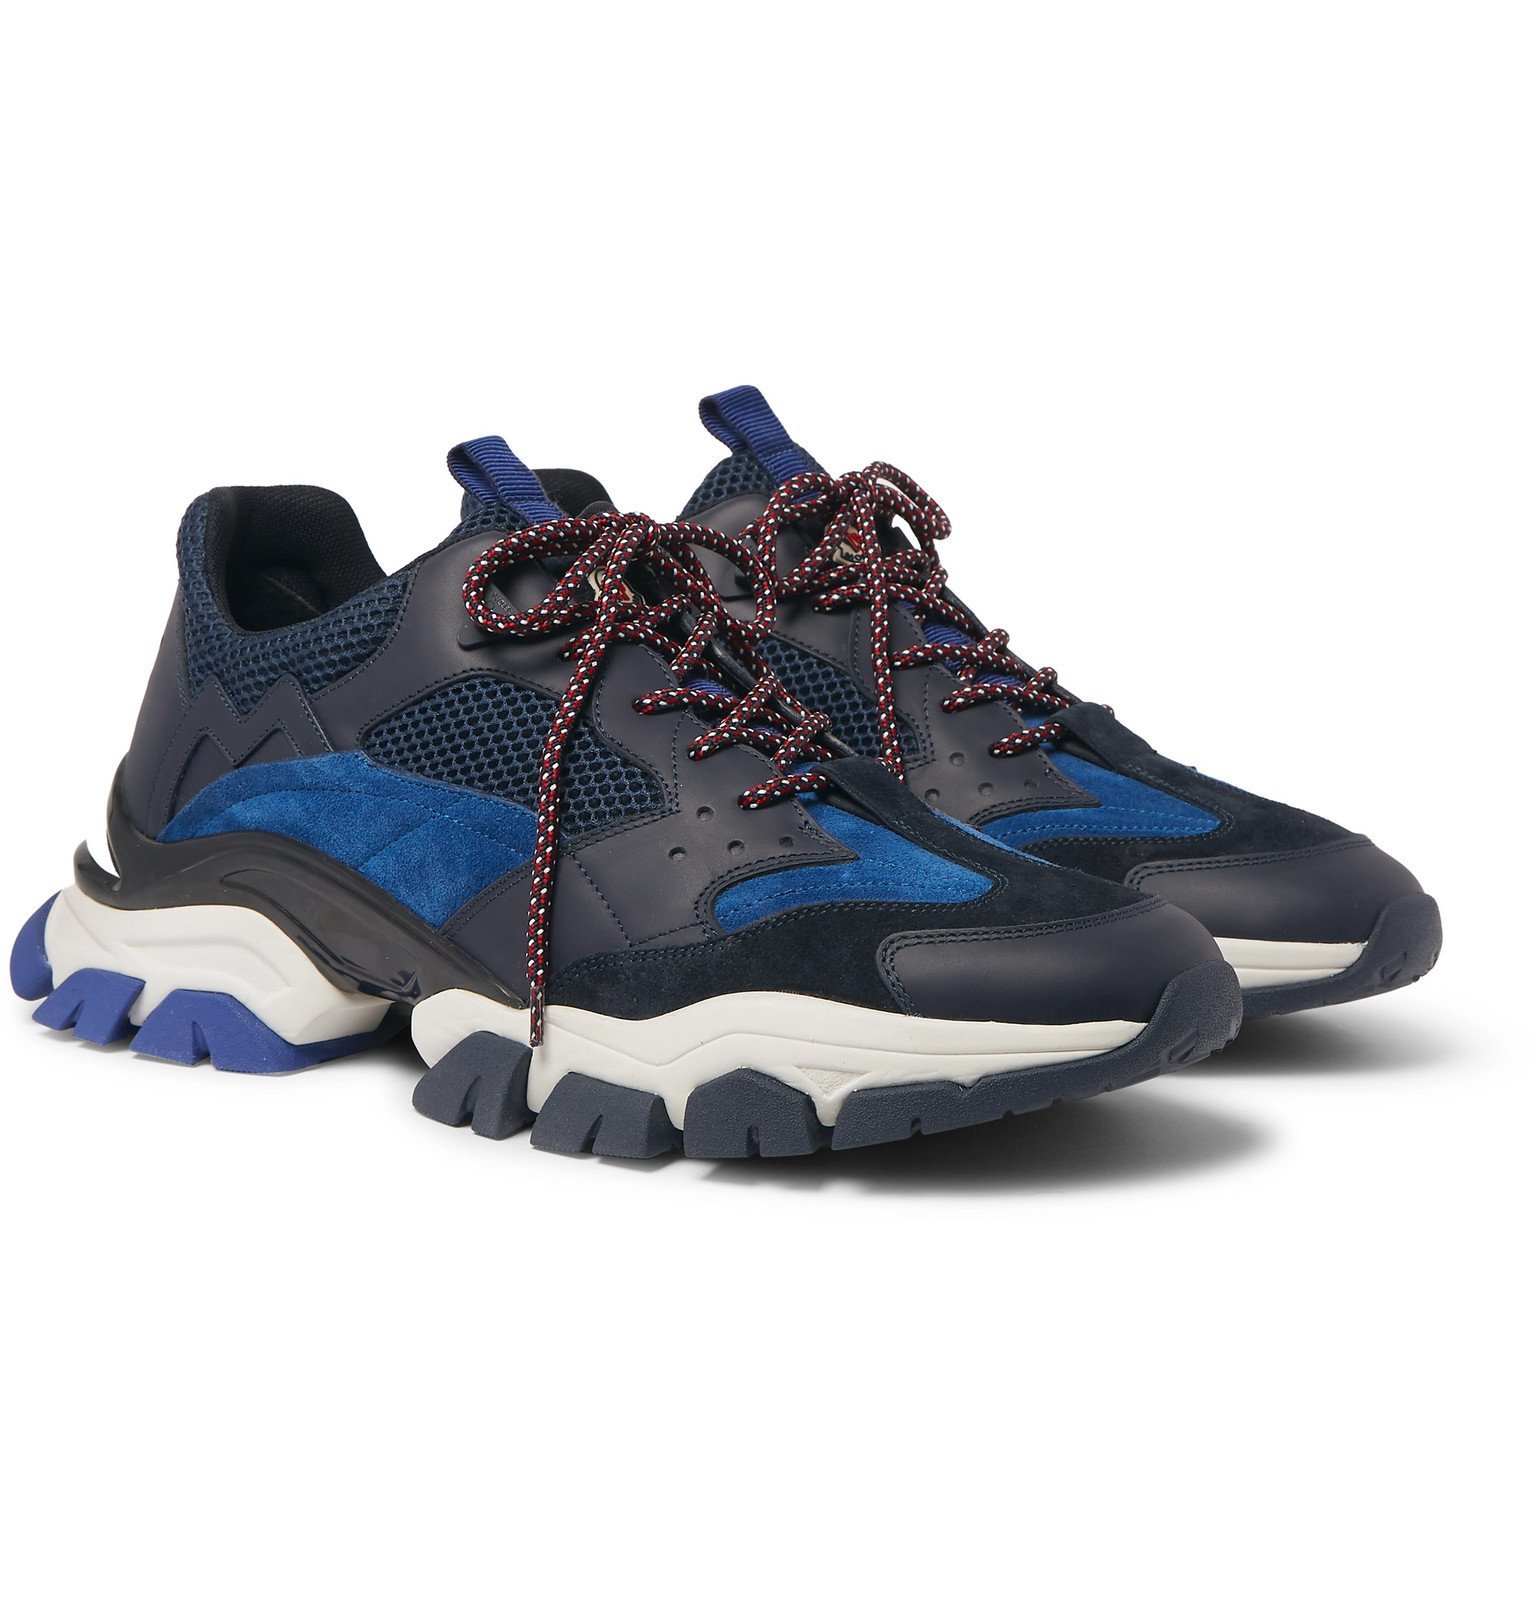 Moncler - Terrence Suede, Leather and Mesh Sneakers - Blue Moncler